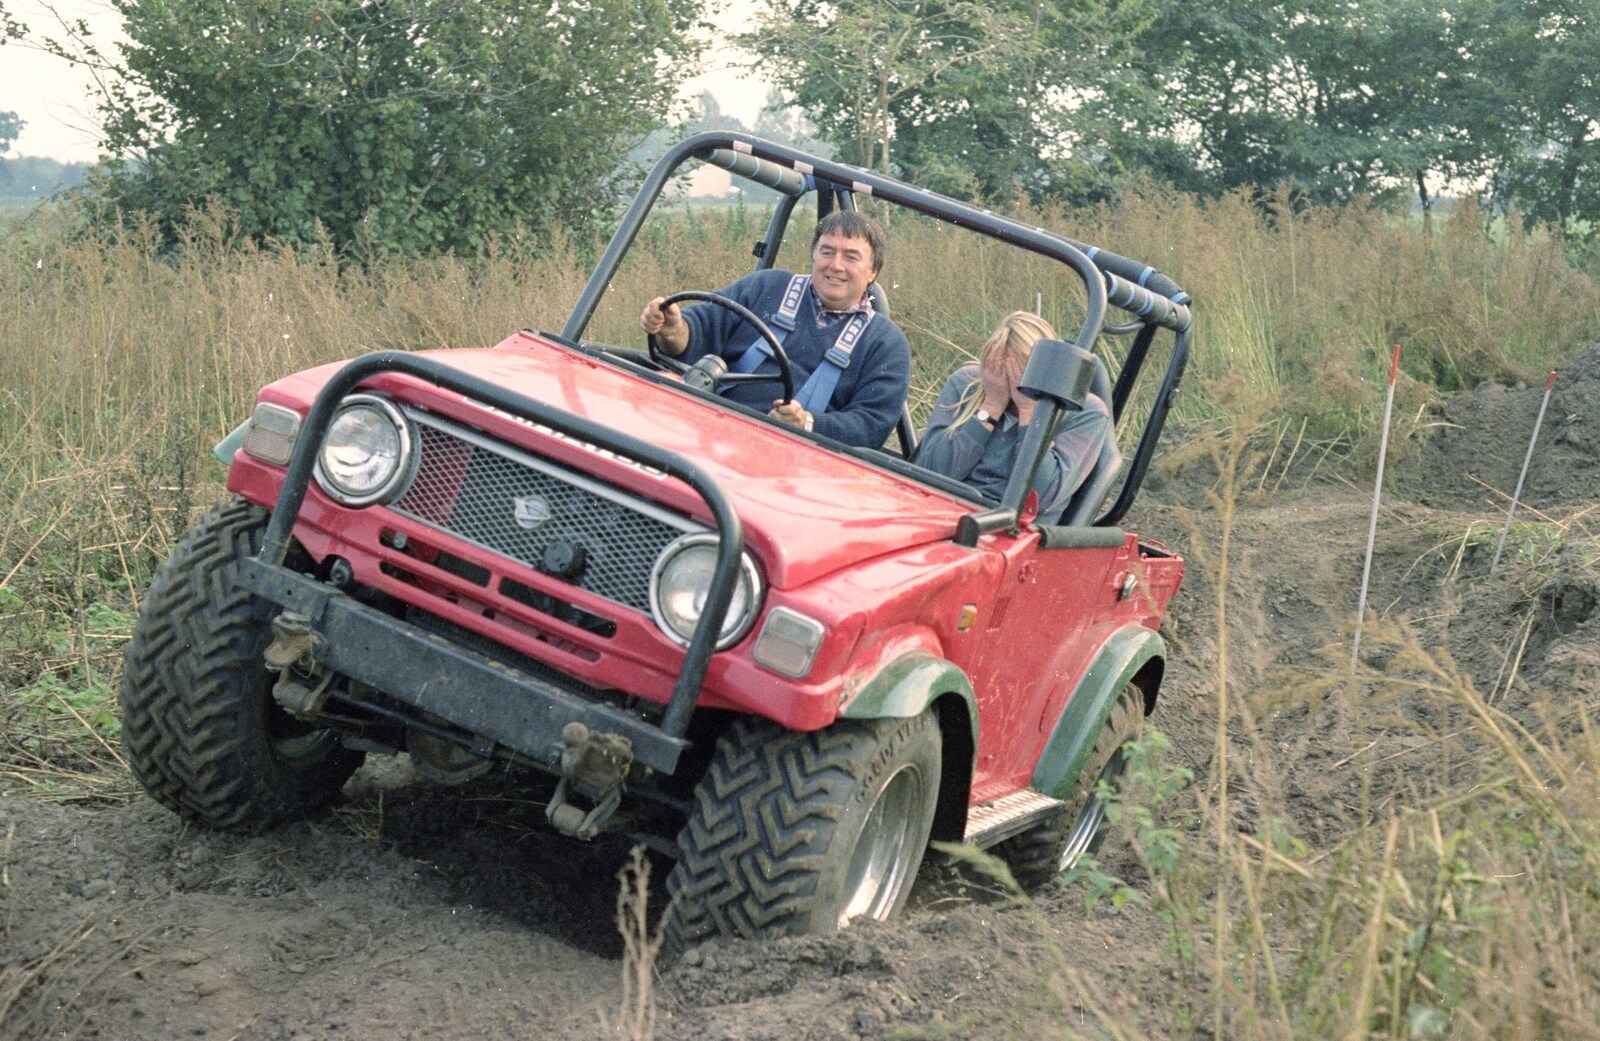 Cider Making (without Rosie), Stuston, Suffolk - 23rd September 1994: Sue keeps her eyes covered as Corky drives around